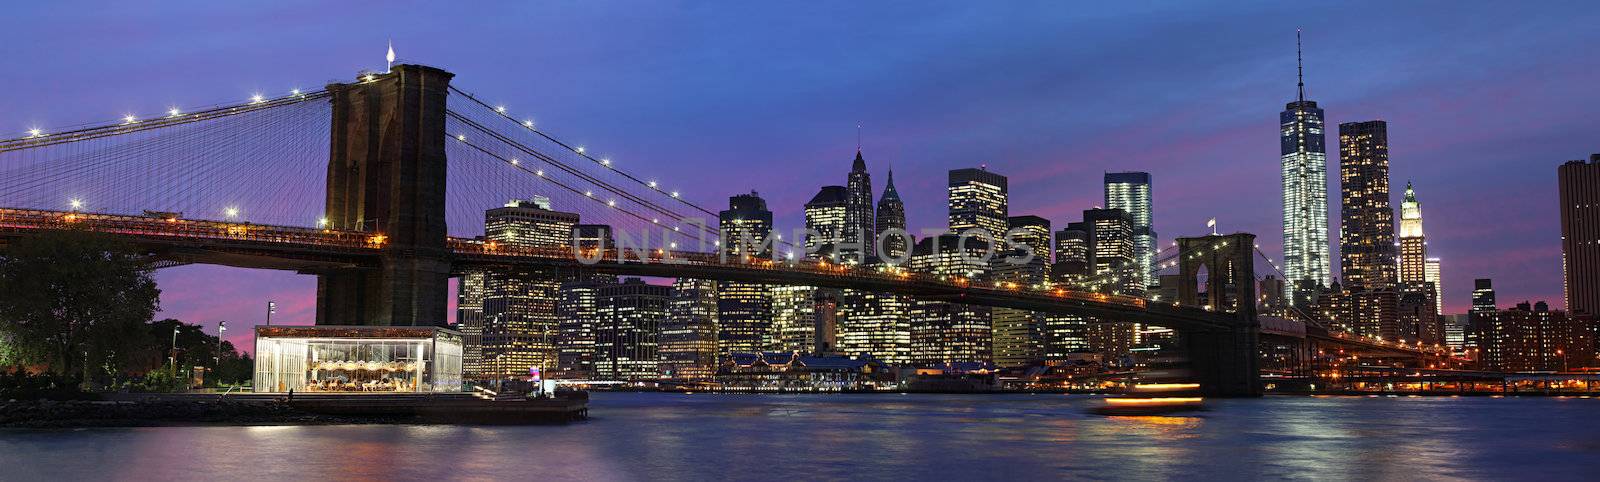 Panorama of Brooklyn Bridge, East River and Manhattan at sunset with lights and reflections. New York